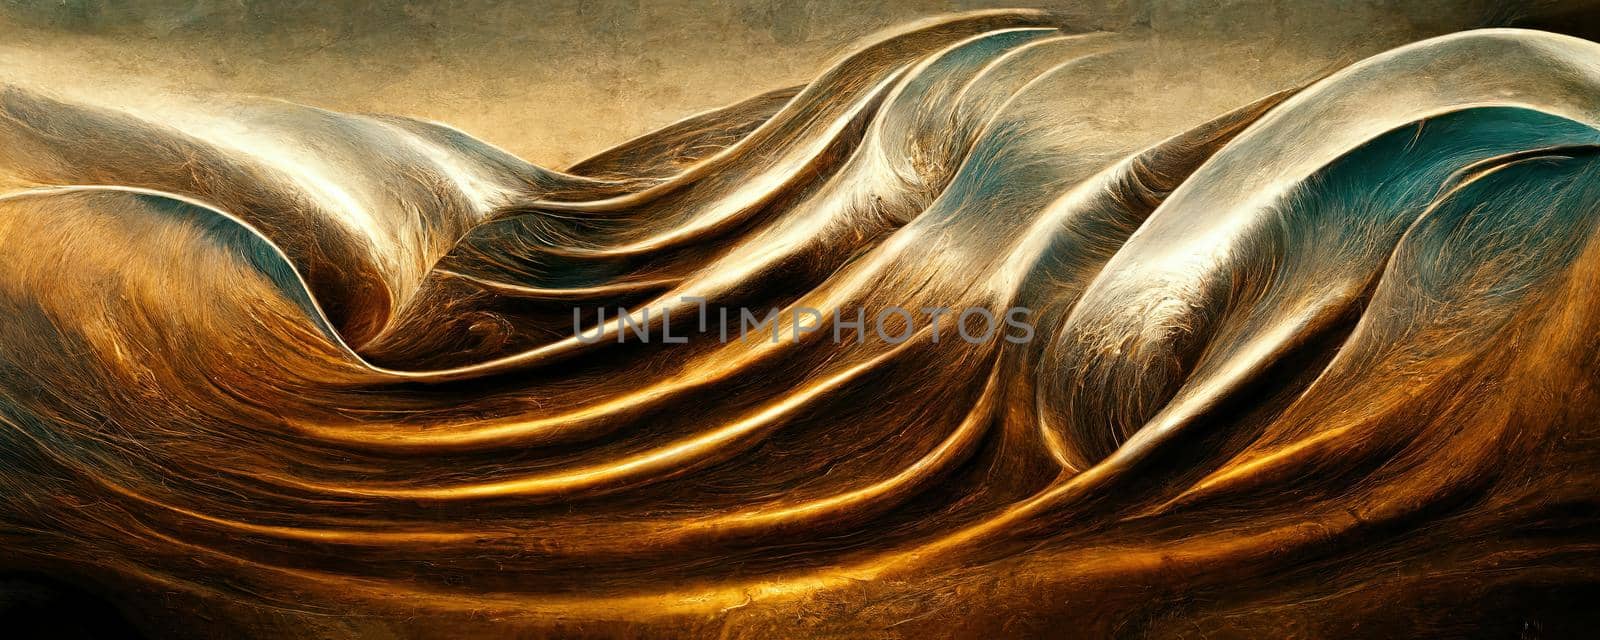 illustration of golden lines reminiscent of embossed leather and sea waves by TRMK